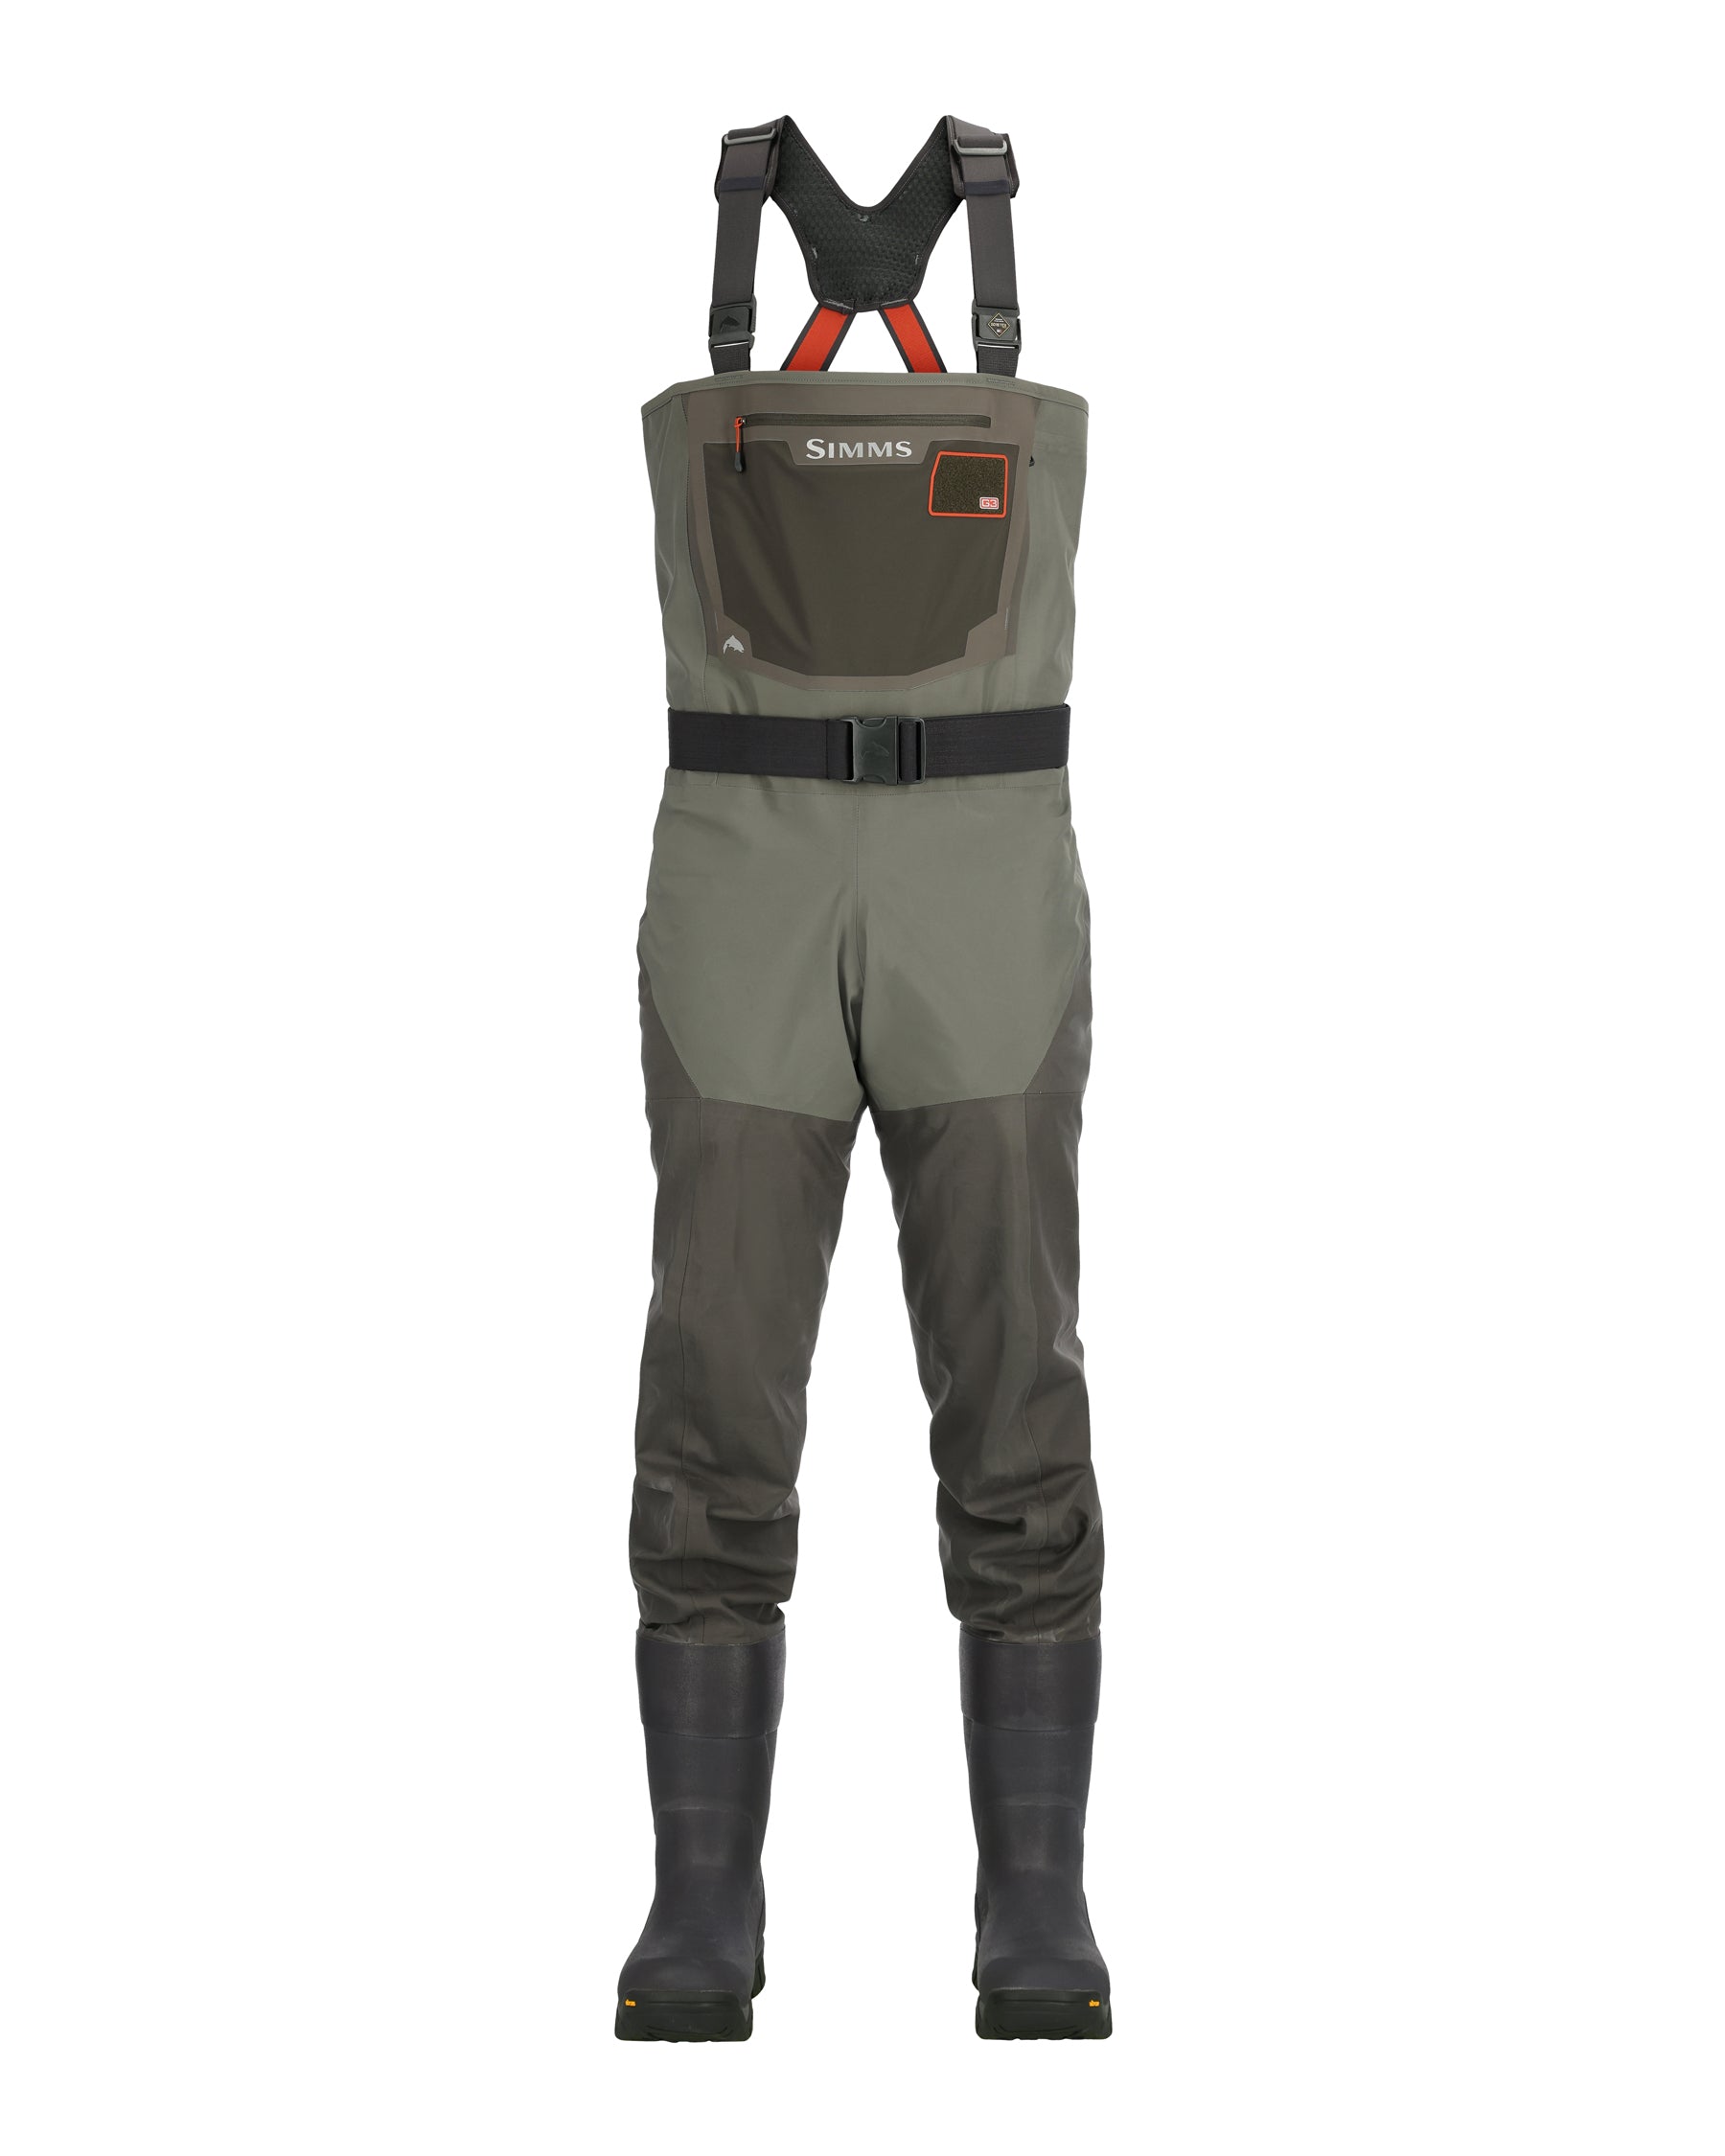 M's G3 Guide Waders - Bootfoot - Vibram Sole | Simms Fishing Products